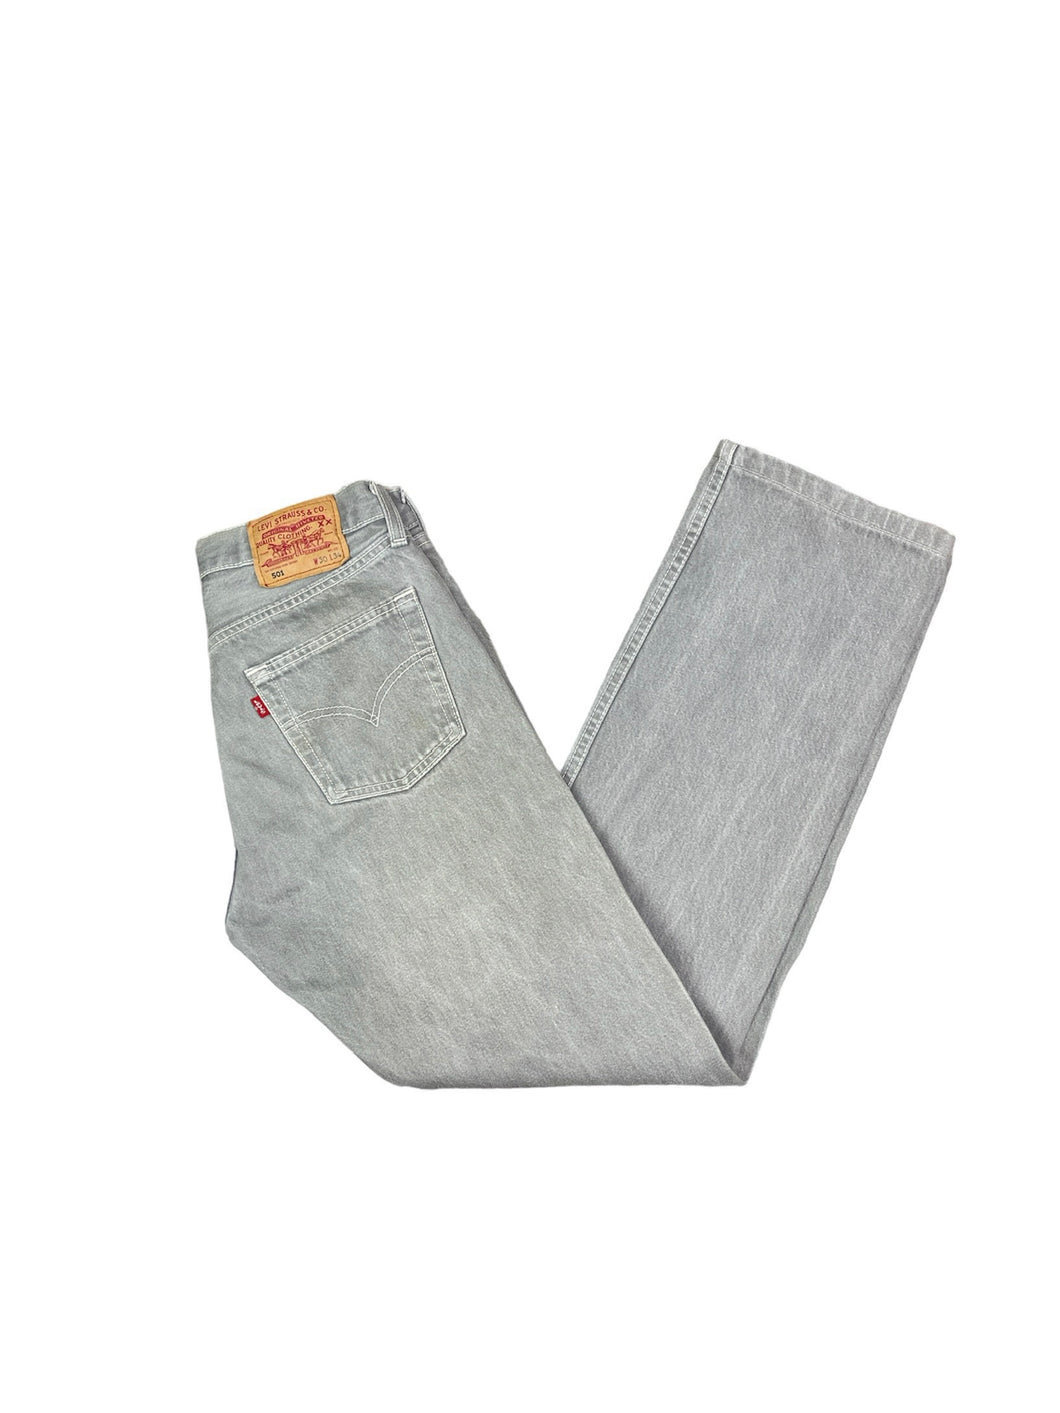 Levis 501 Jean - Small